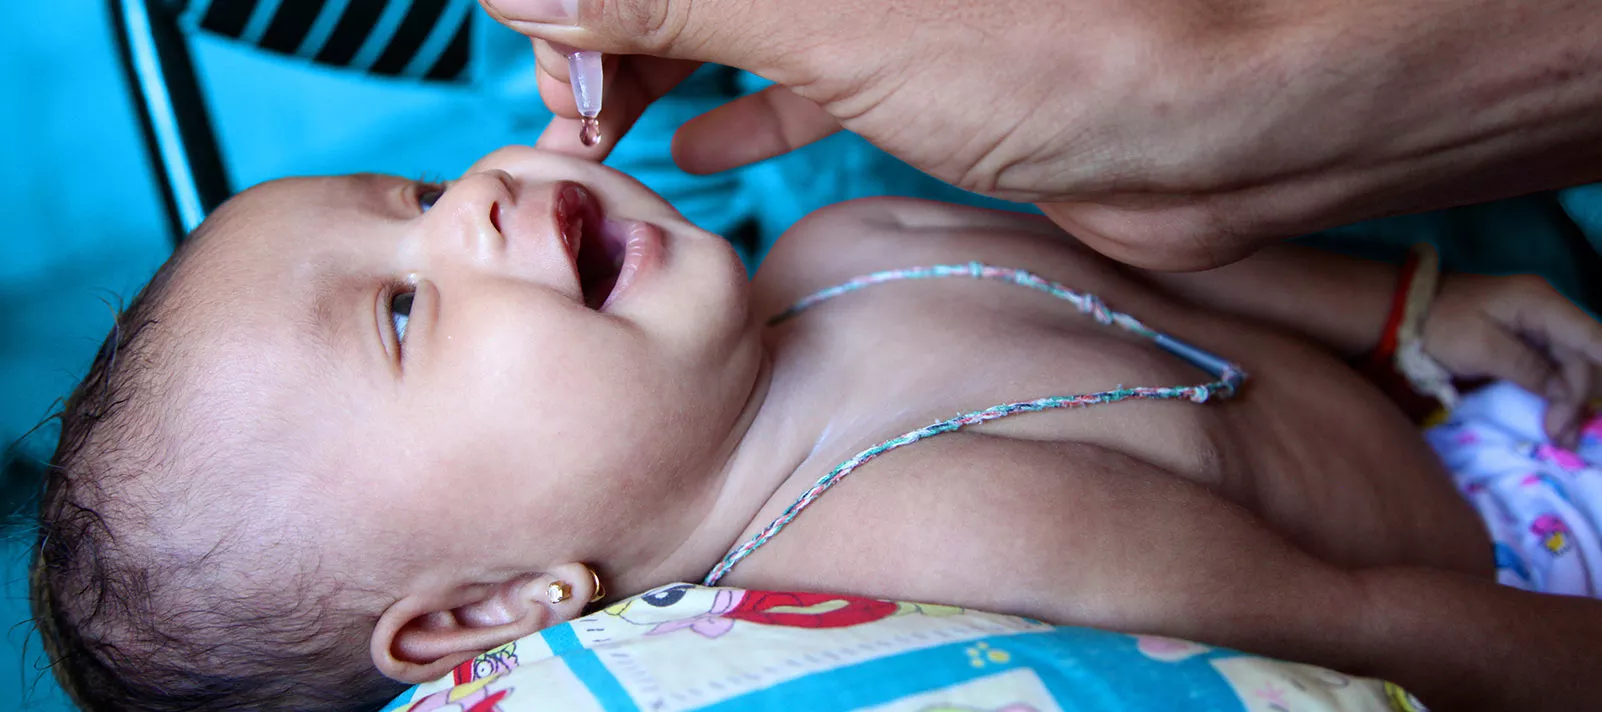 A baby is administered an oral vaccine during an immunization session at the health centre in the village of Preak Krabao, Kang Meas District, Cambodia, June 2015.